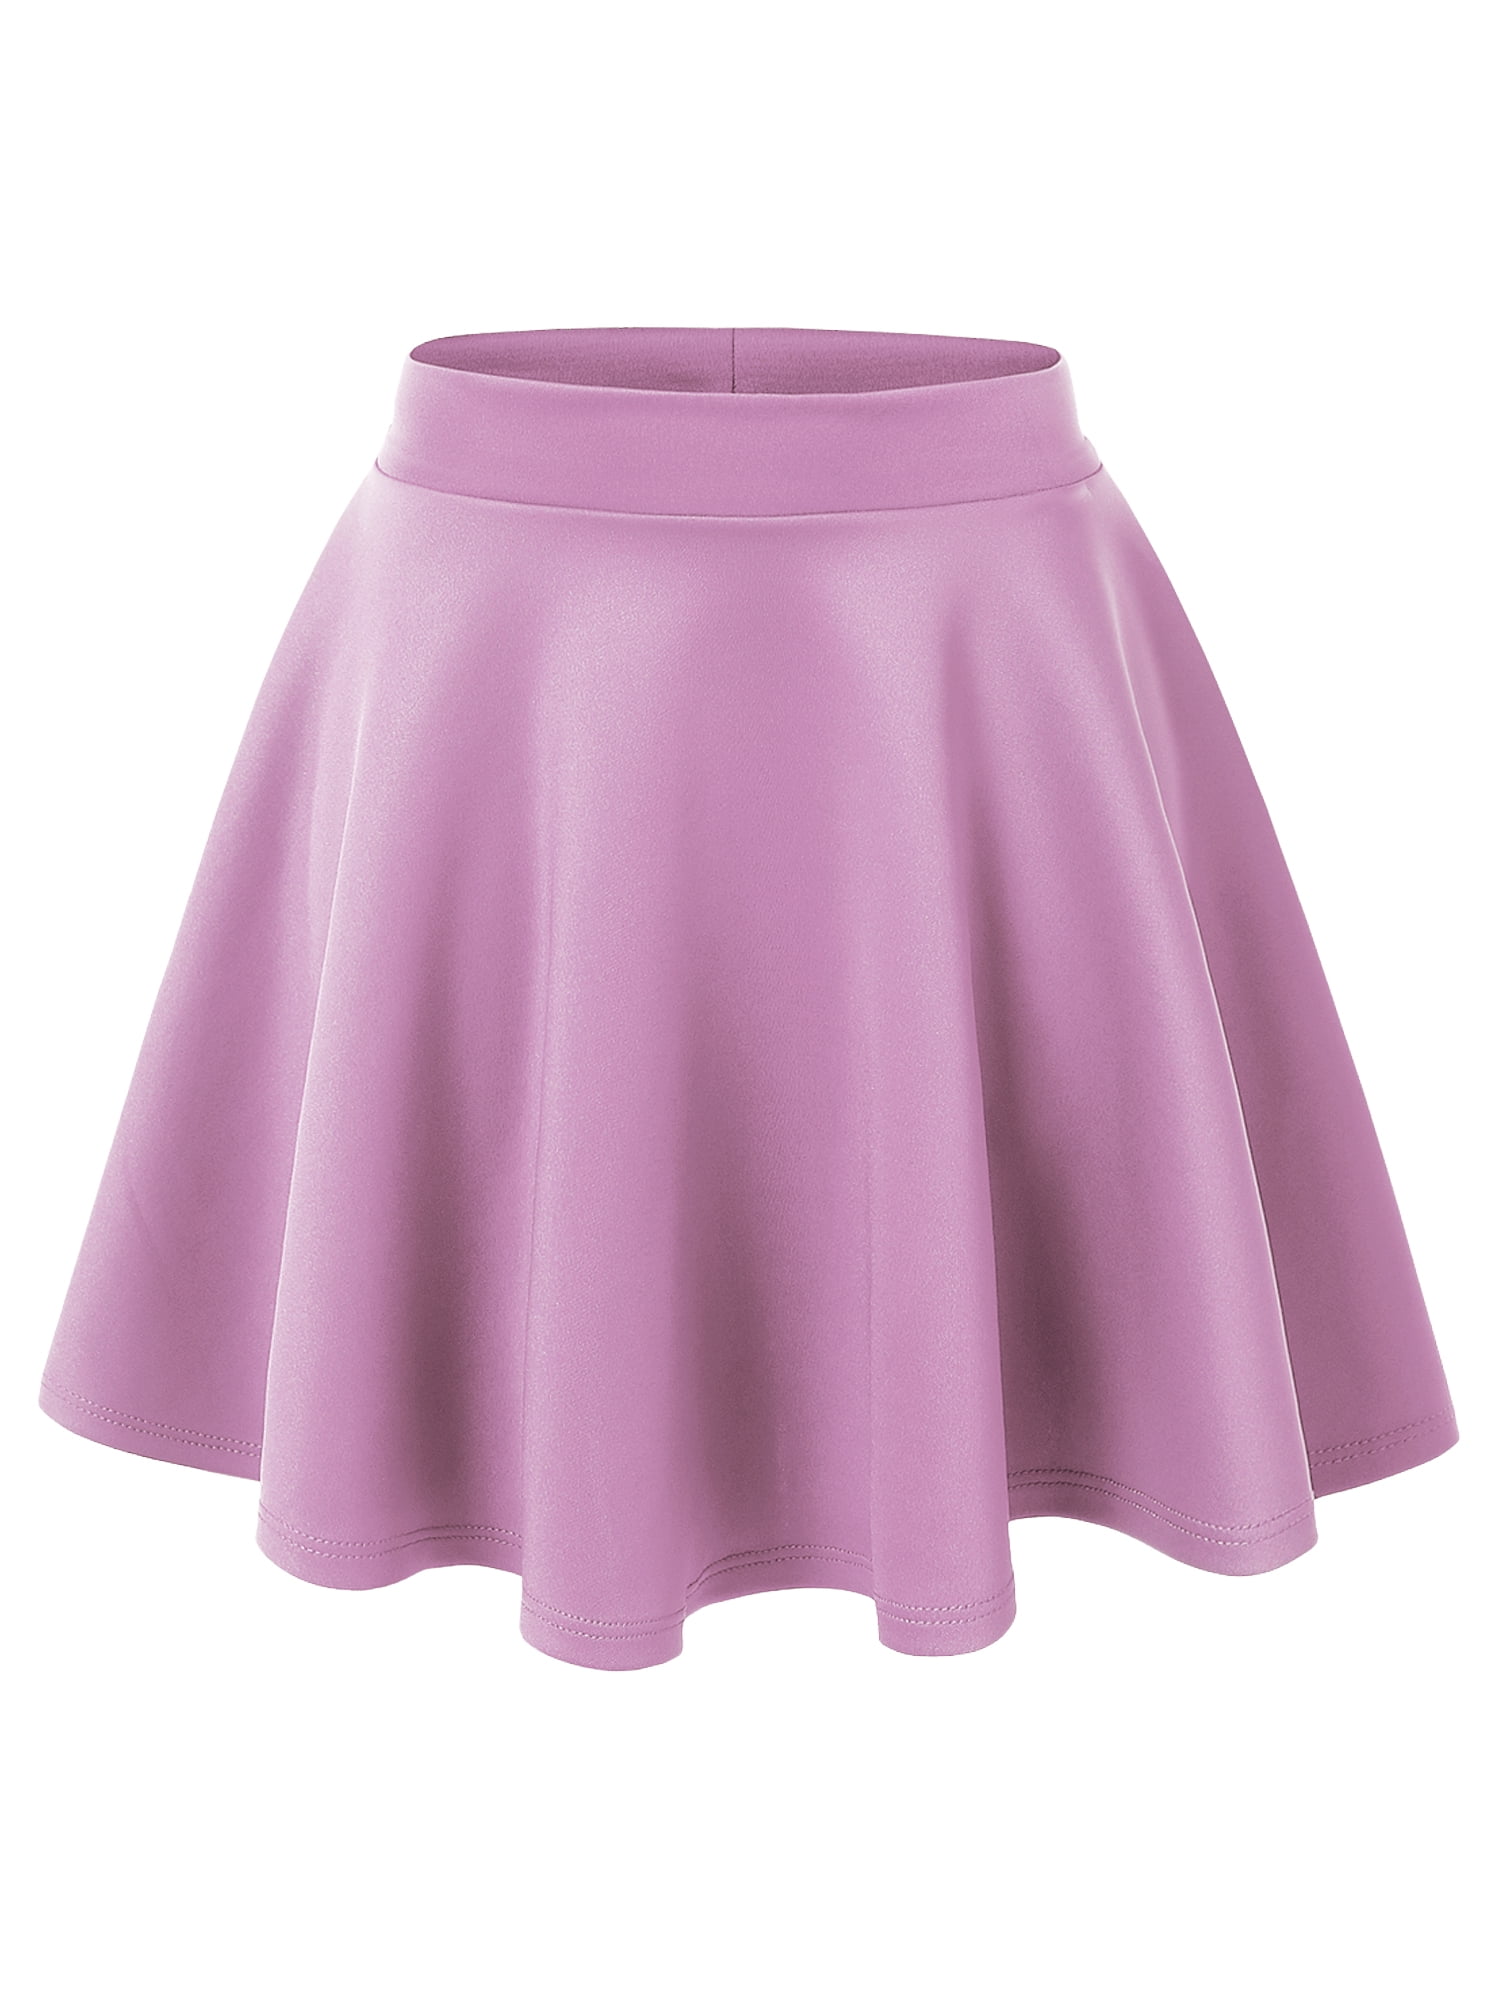 Made by Johnny Women's Basic Versatile Stretchy Flared Skater Skirt M LILAC